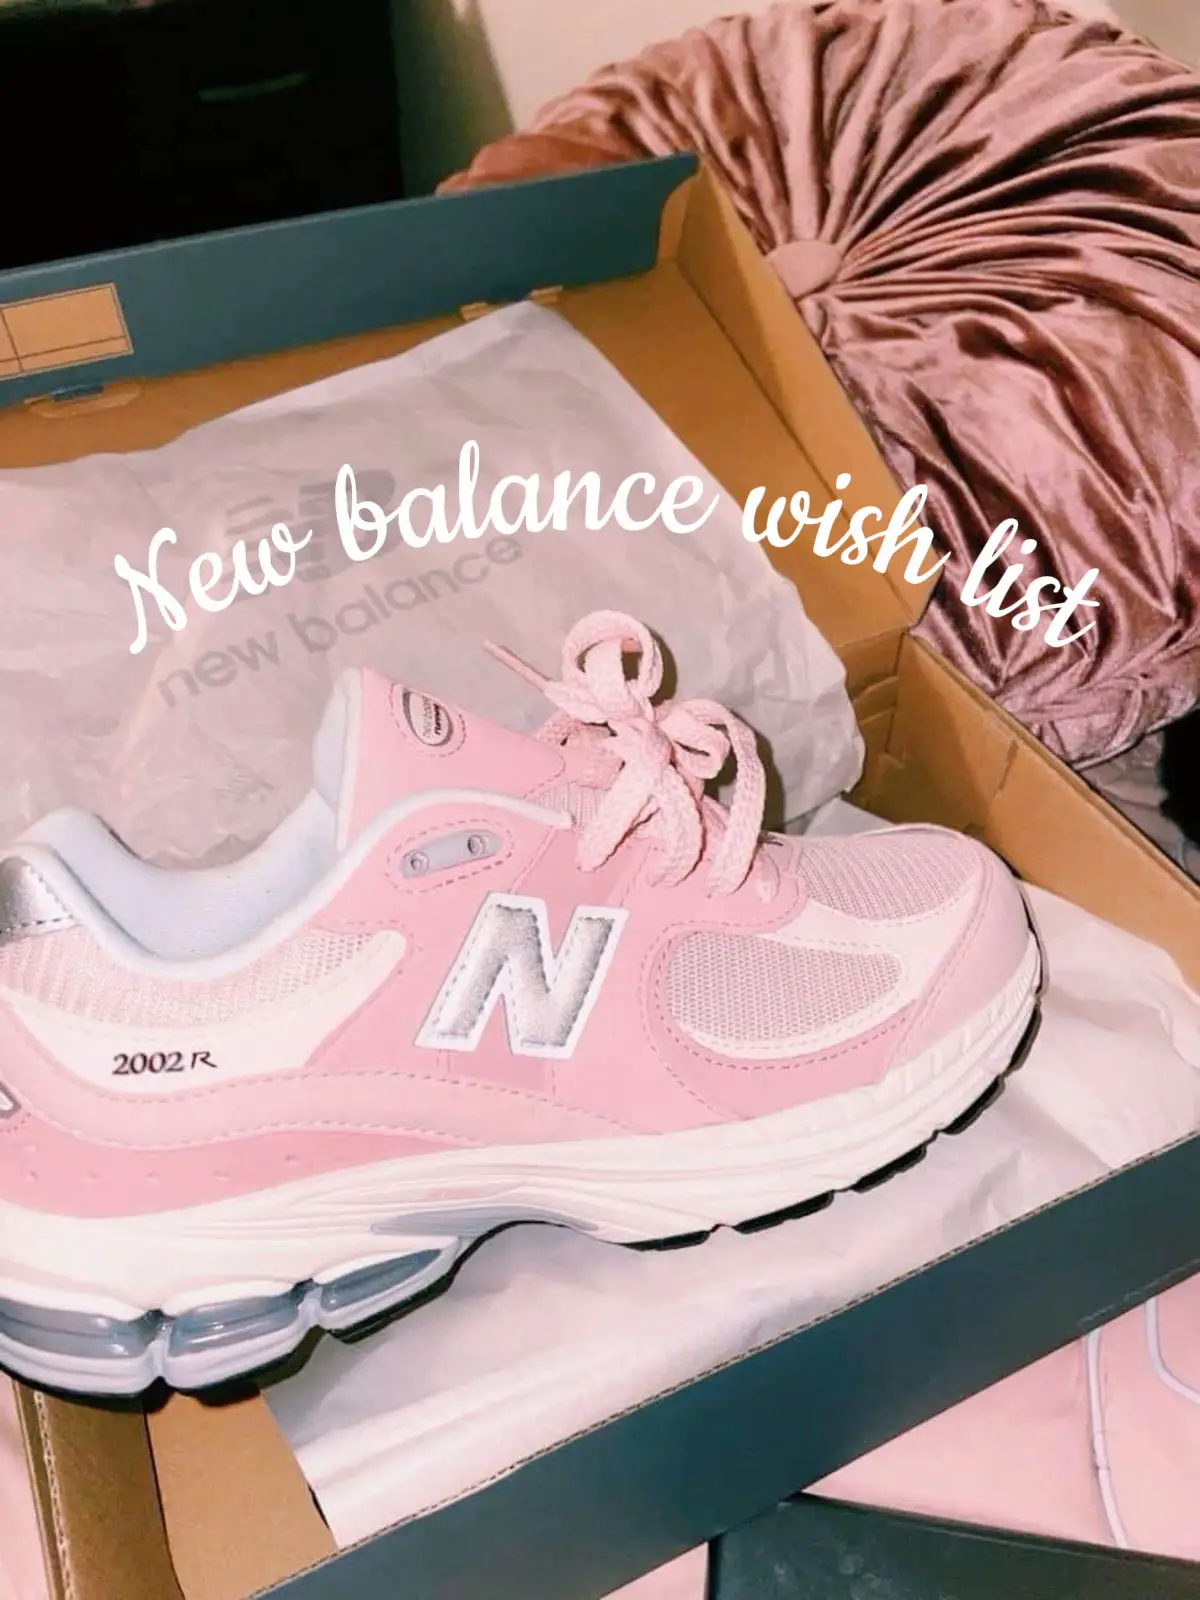 4 WAYS TO STYLE NEW BALANCE 530's, Gallery posted by lucygeorgina.g